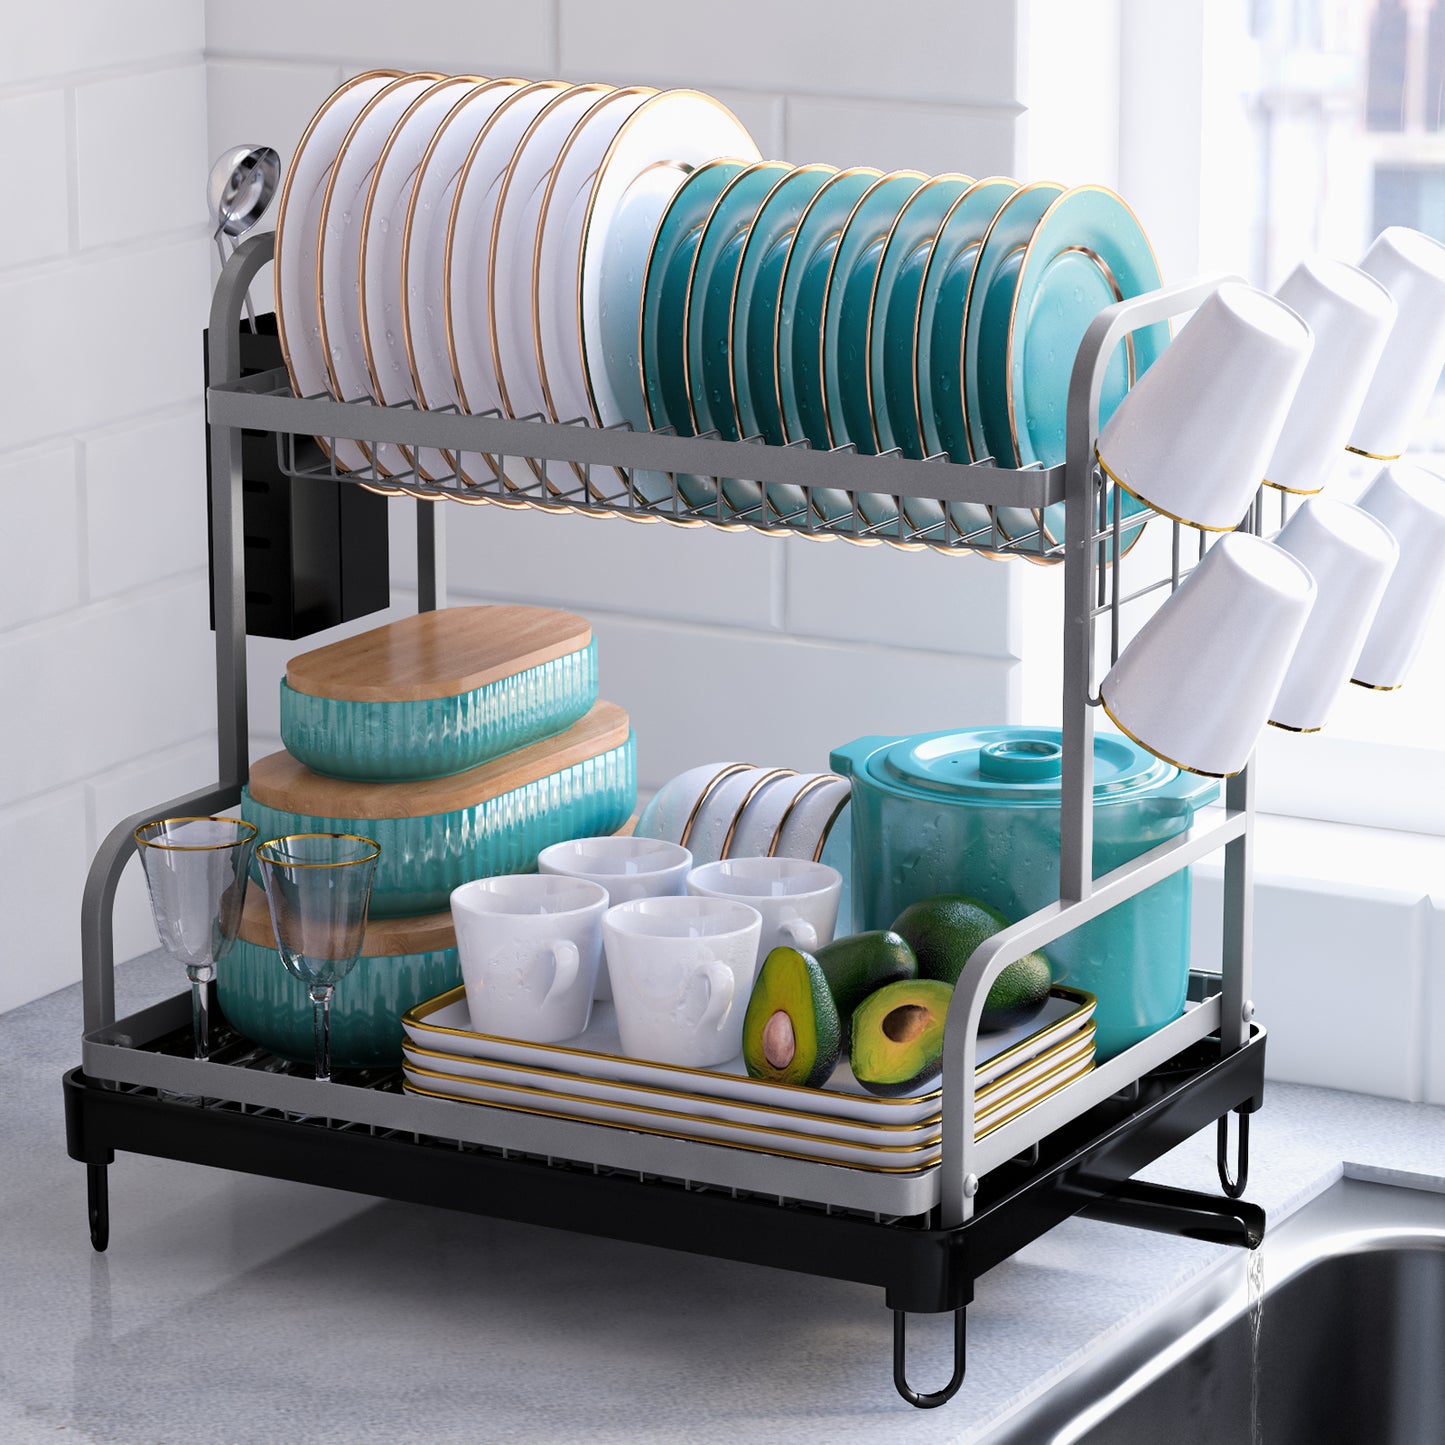 Kitsure Dish Drying Rack - Multipurpose 2-Tier Dish Rack, Dish Drainers for Kitchen Counter, Large-Capacity Dish Dryer, Kitchen Drying Rack for Dishes w/Cutlery Holder 4064BL（4064）